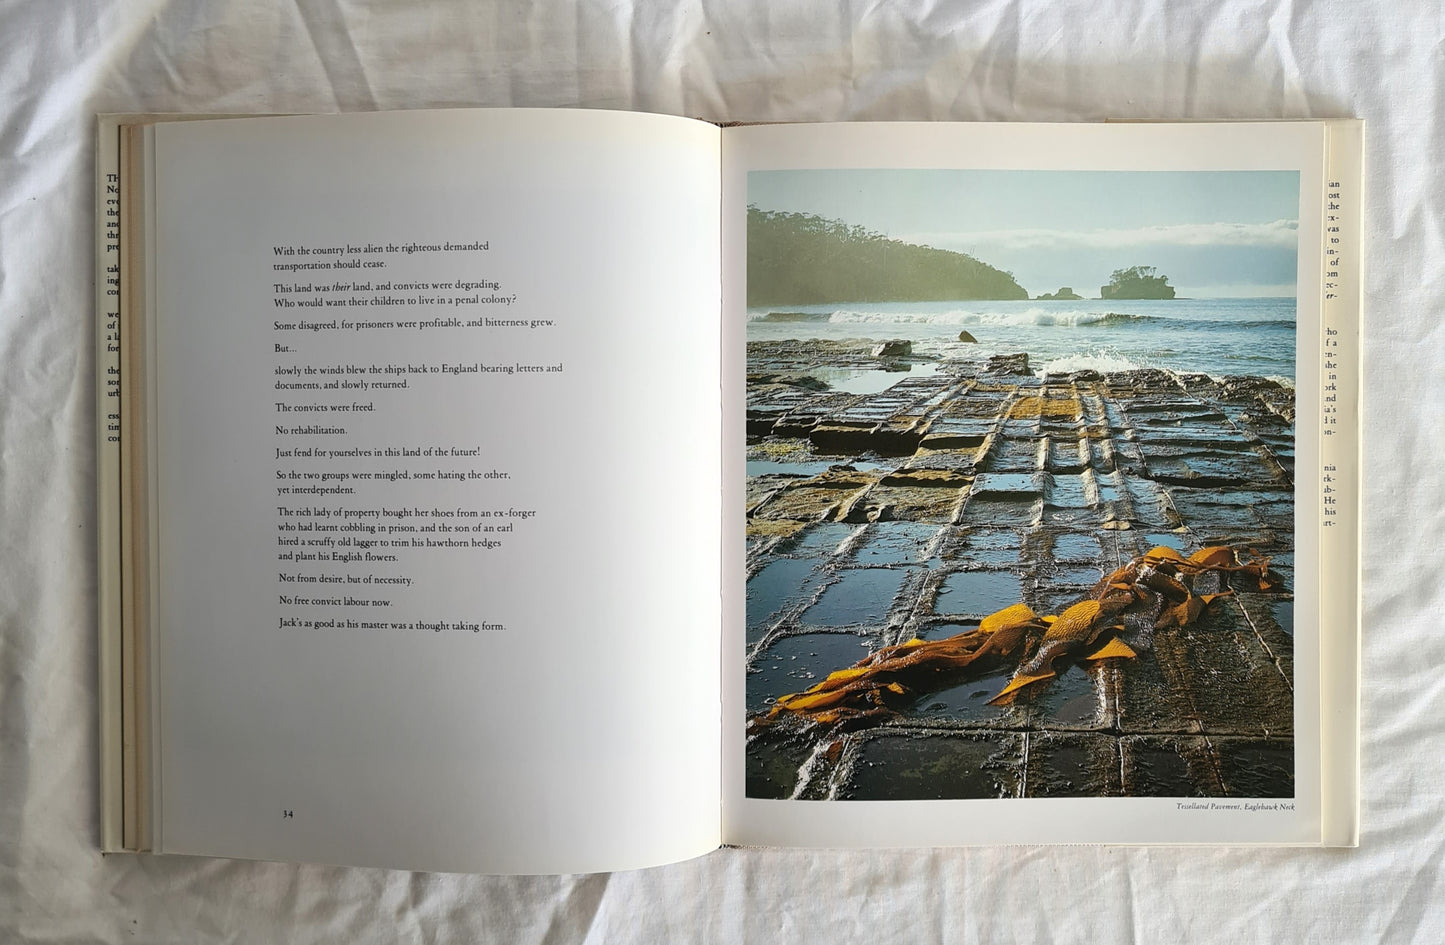 The Quiet Land  Photographs by Peter Dombrovskis  Text by Ellen Miller